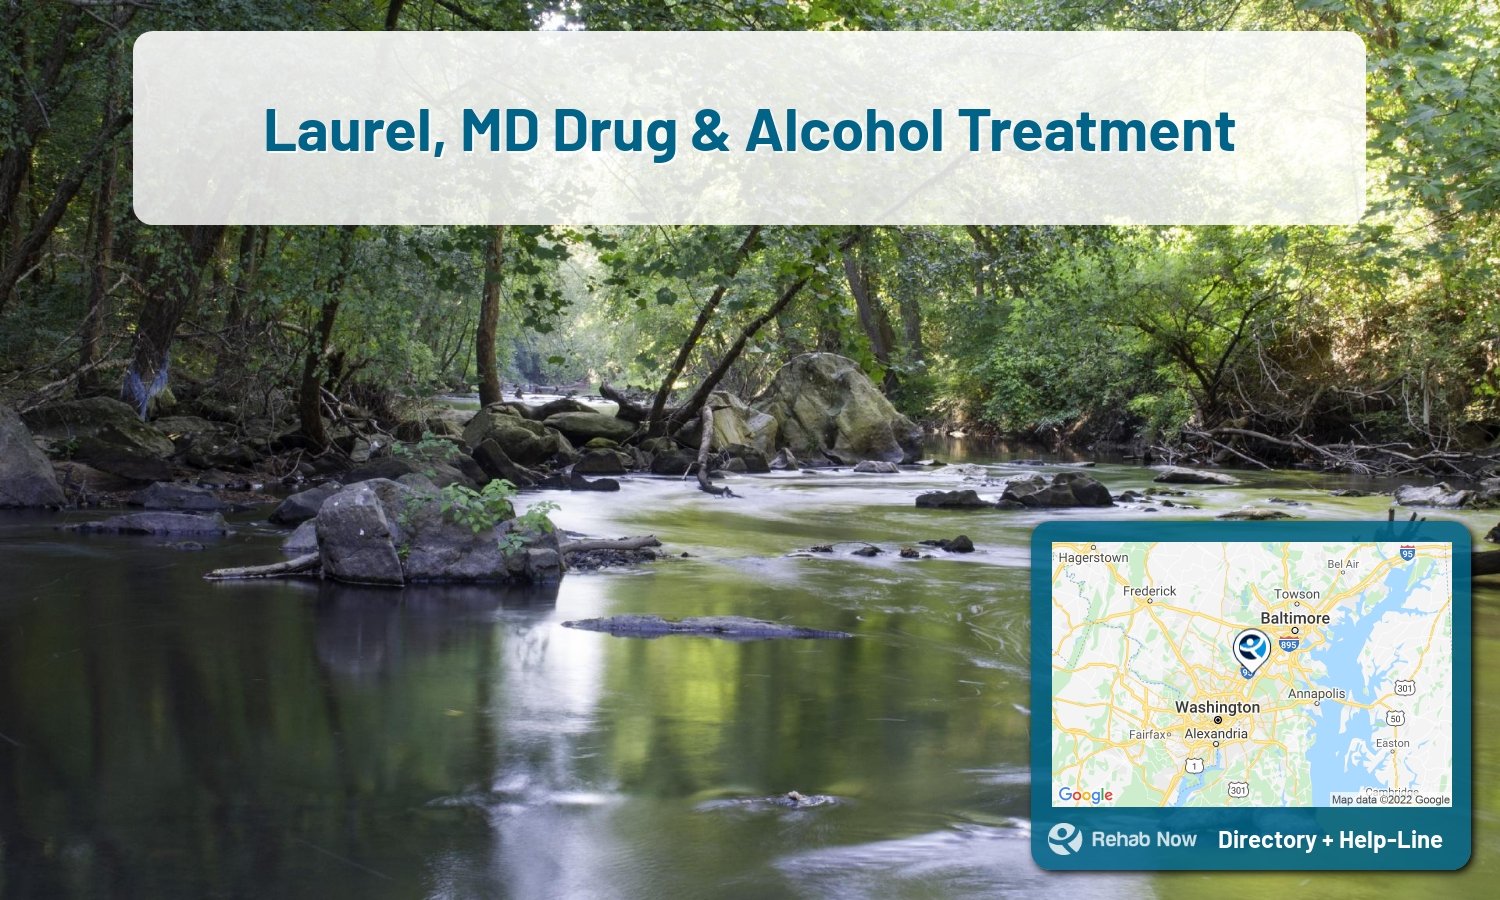 View options, availability, treatment methods, and more, for drug rehab and alcohol treatment in Laurel, Maryland